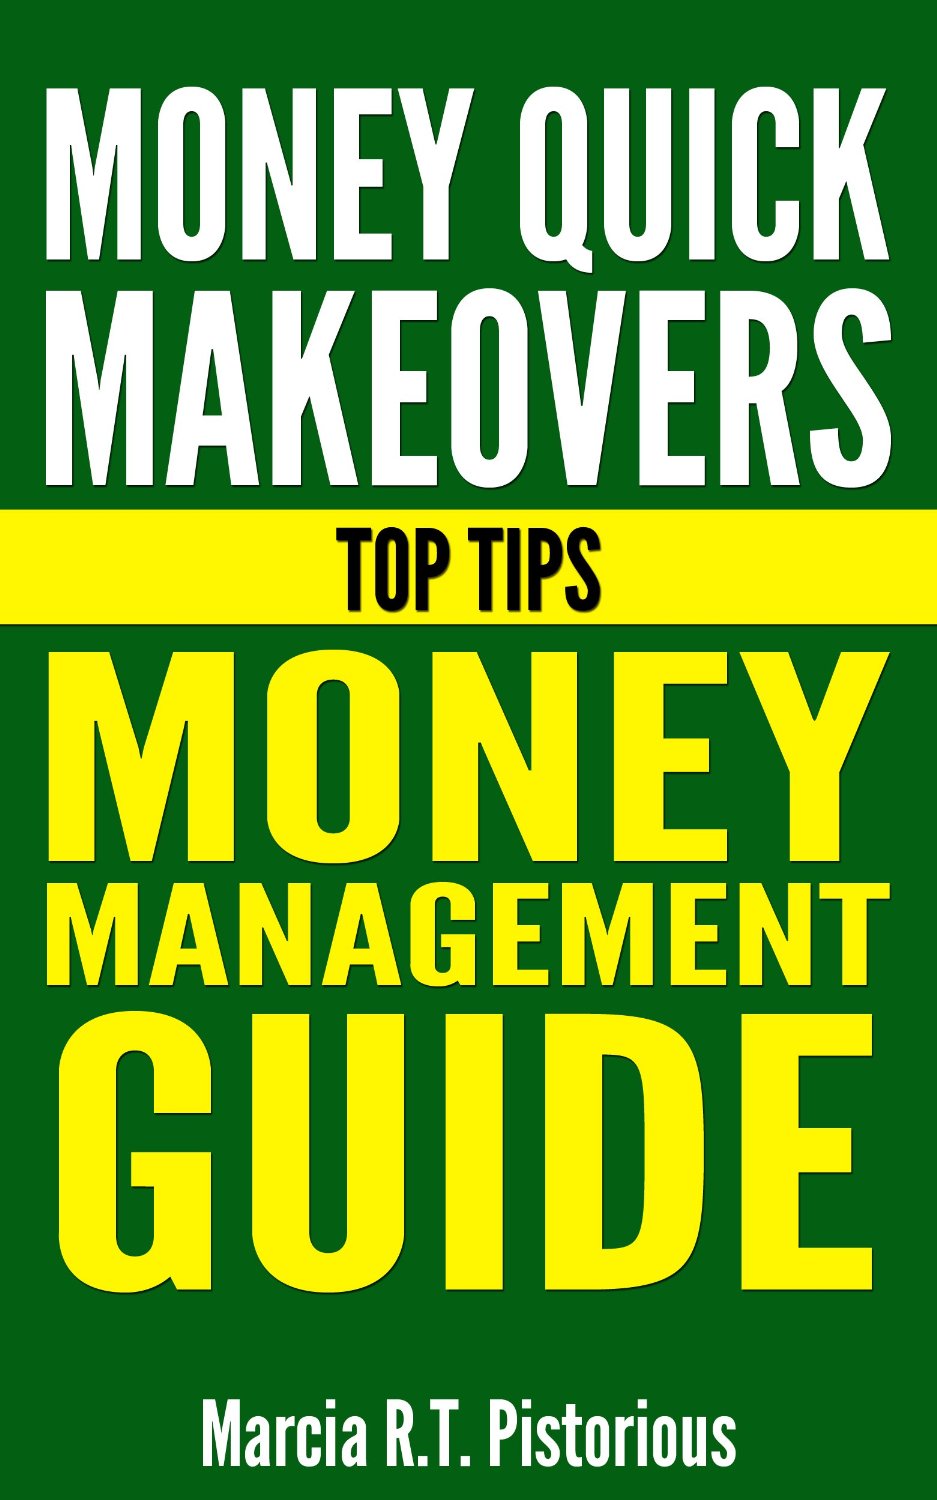 Money Quick Makeovers Top Tips: Money Management Guide by Marcia R.T. Pistorious